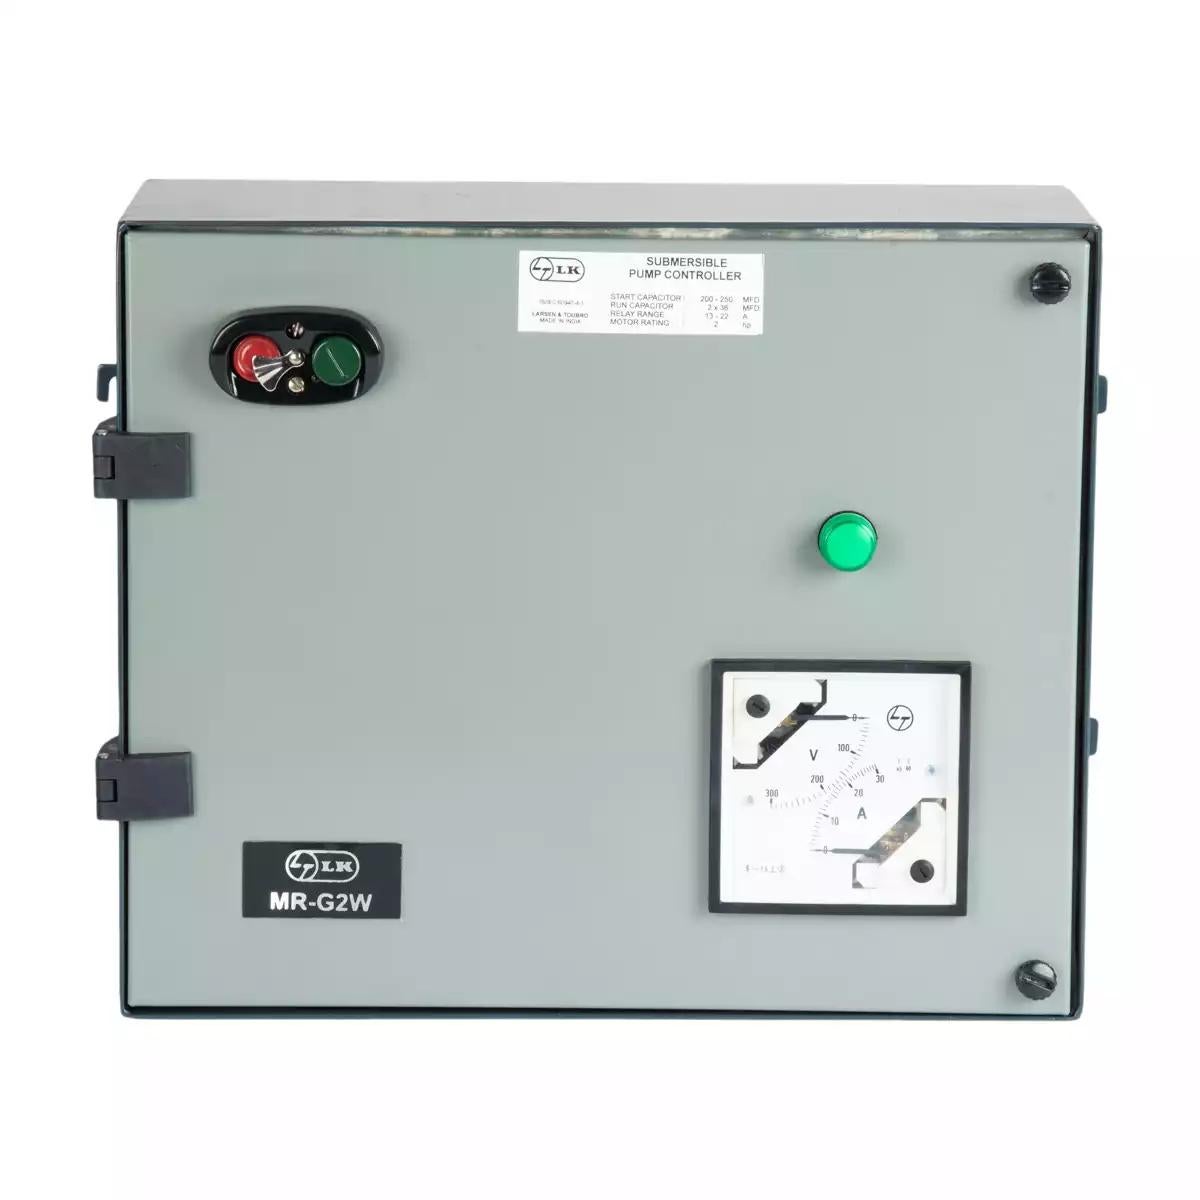 Single Phase Controller with WLC for Submersible Pump Application,MR-G2W,1HP,120 / 150mfd,1 x 36mfd (CS91041BCAE)